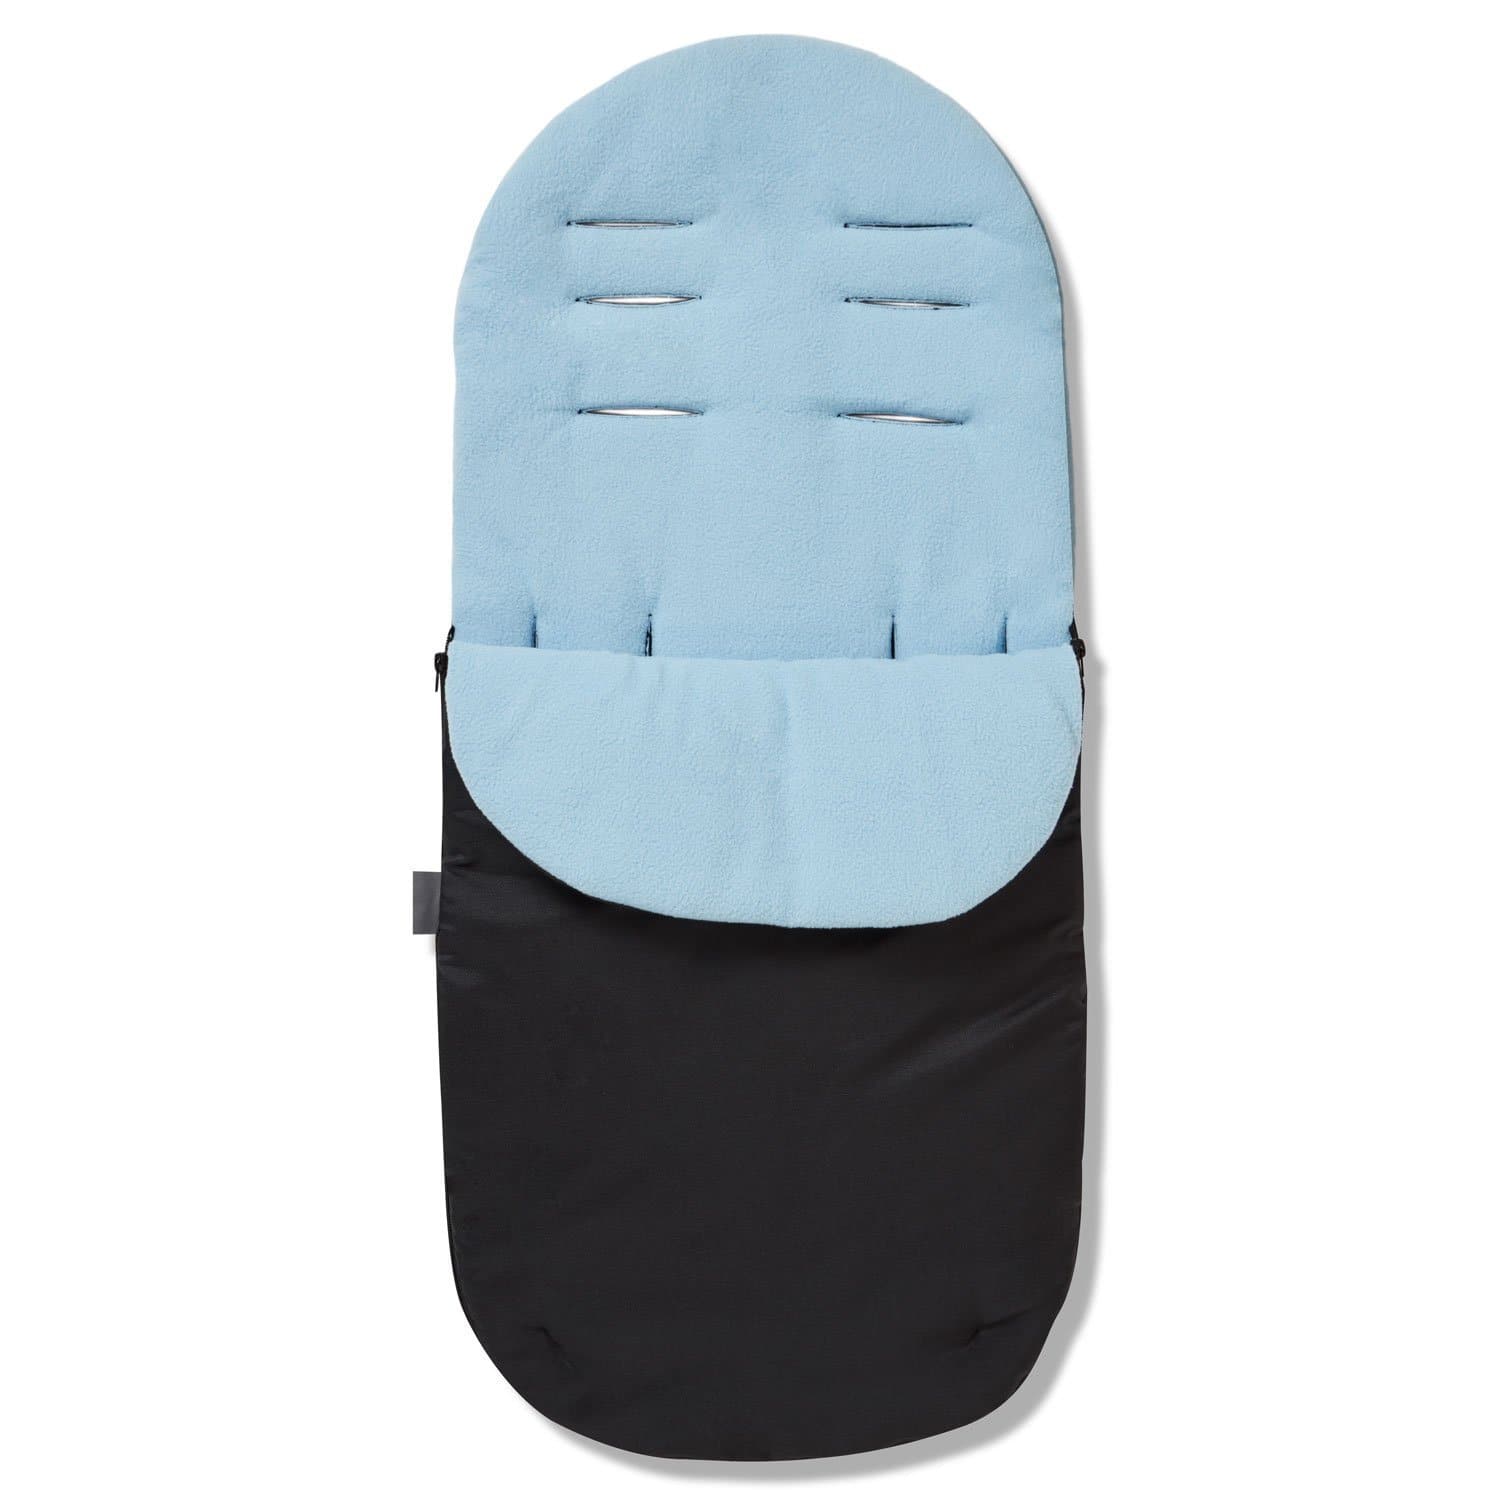 Footmuff / Cosy Toes Compatible with Kiddicare.com - Light Blue / Fits All Models | For Your Little One